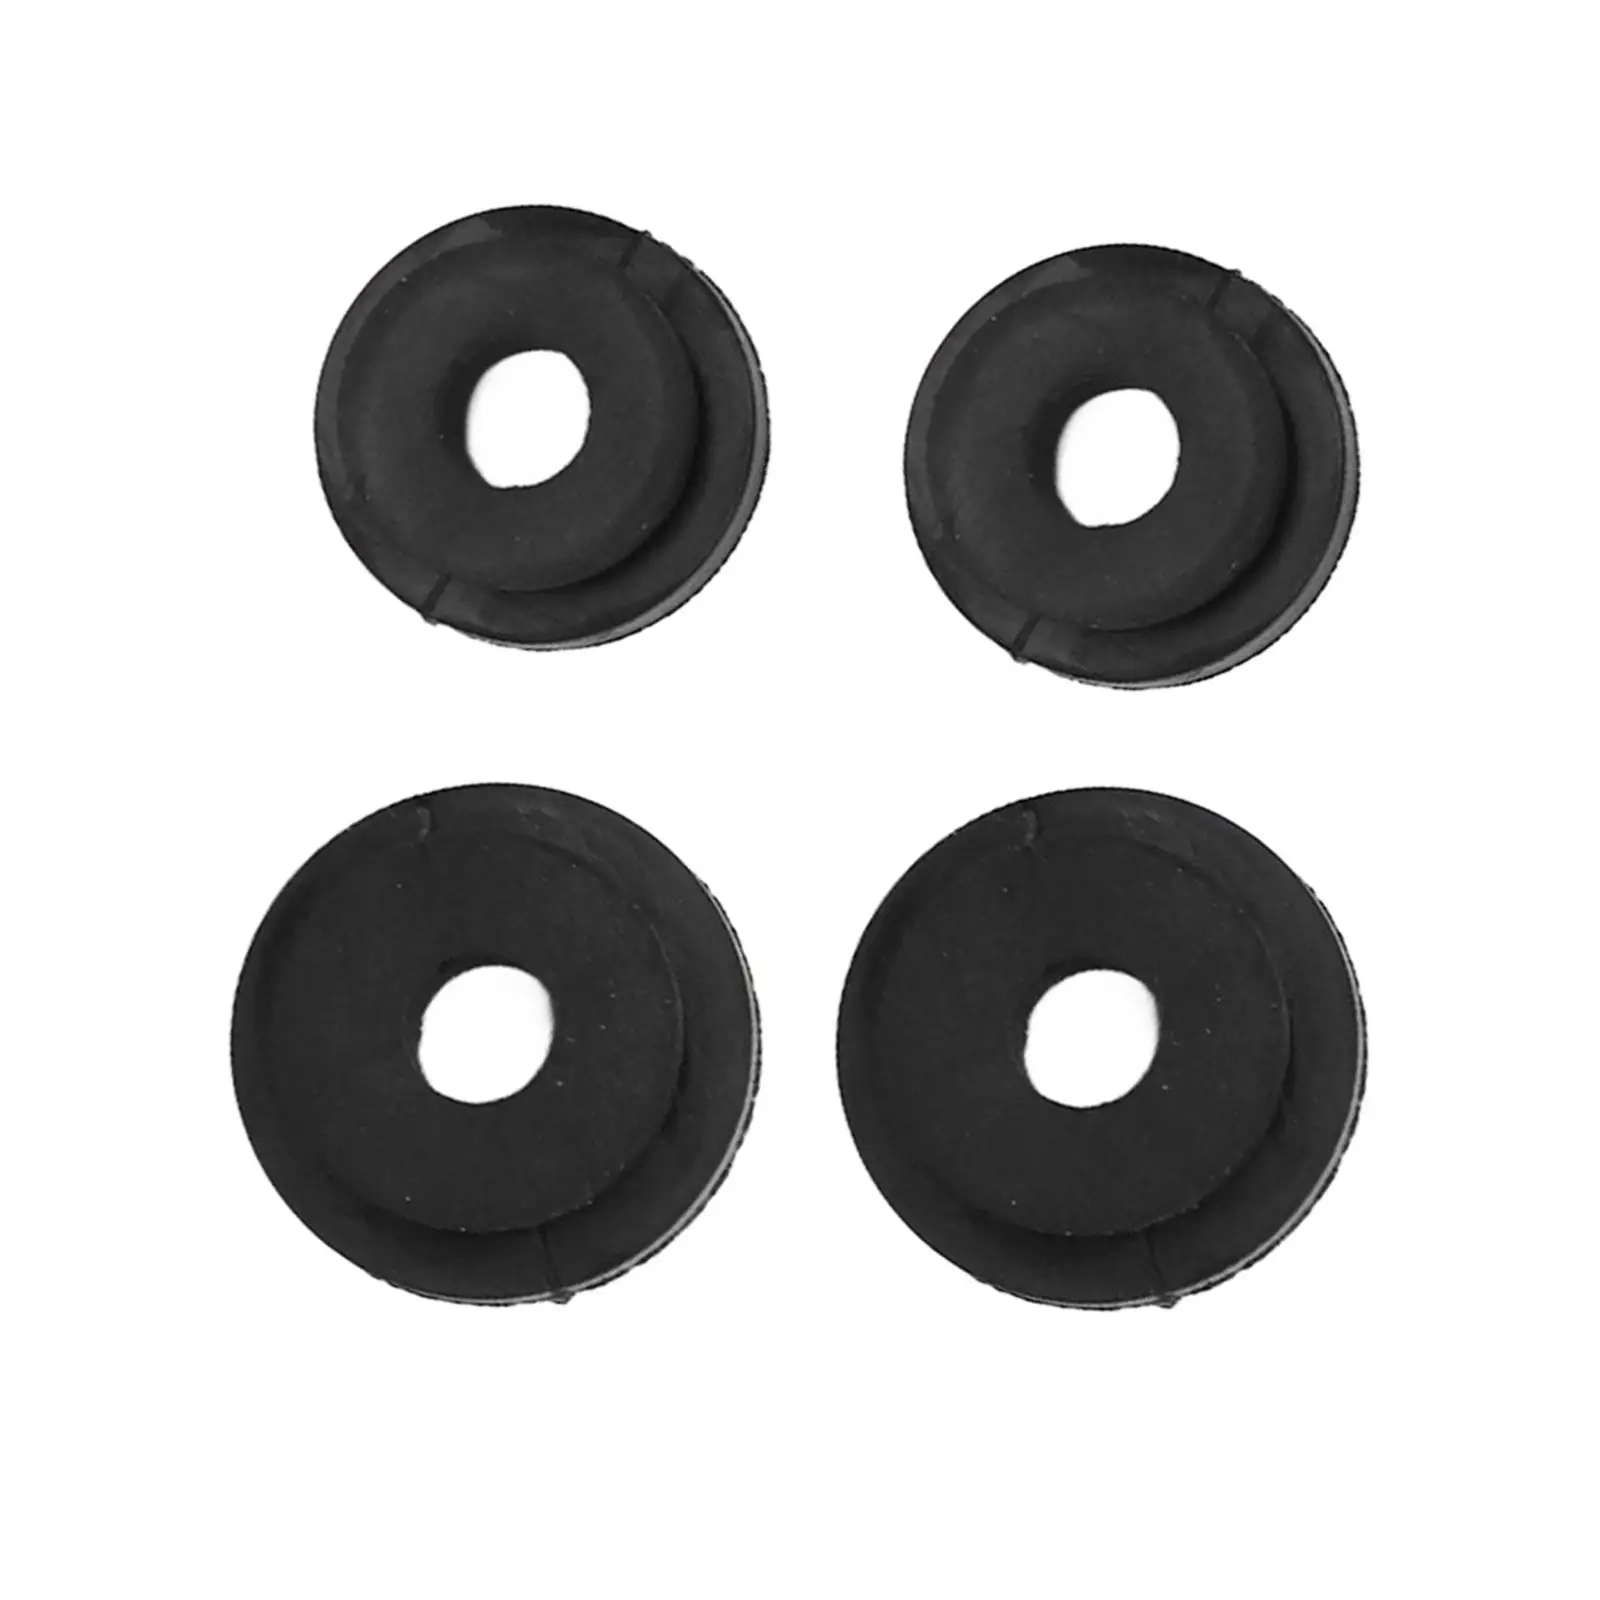 4 Pieces Radiator Mounting Rubber Part Assembly Replacement Accessory Durable for Land Rover Range Rover L322 Discovery 1